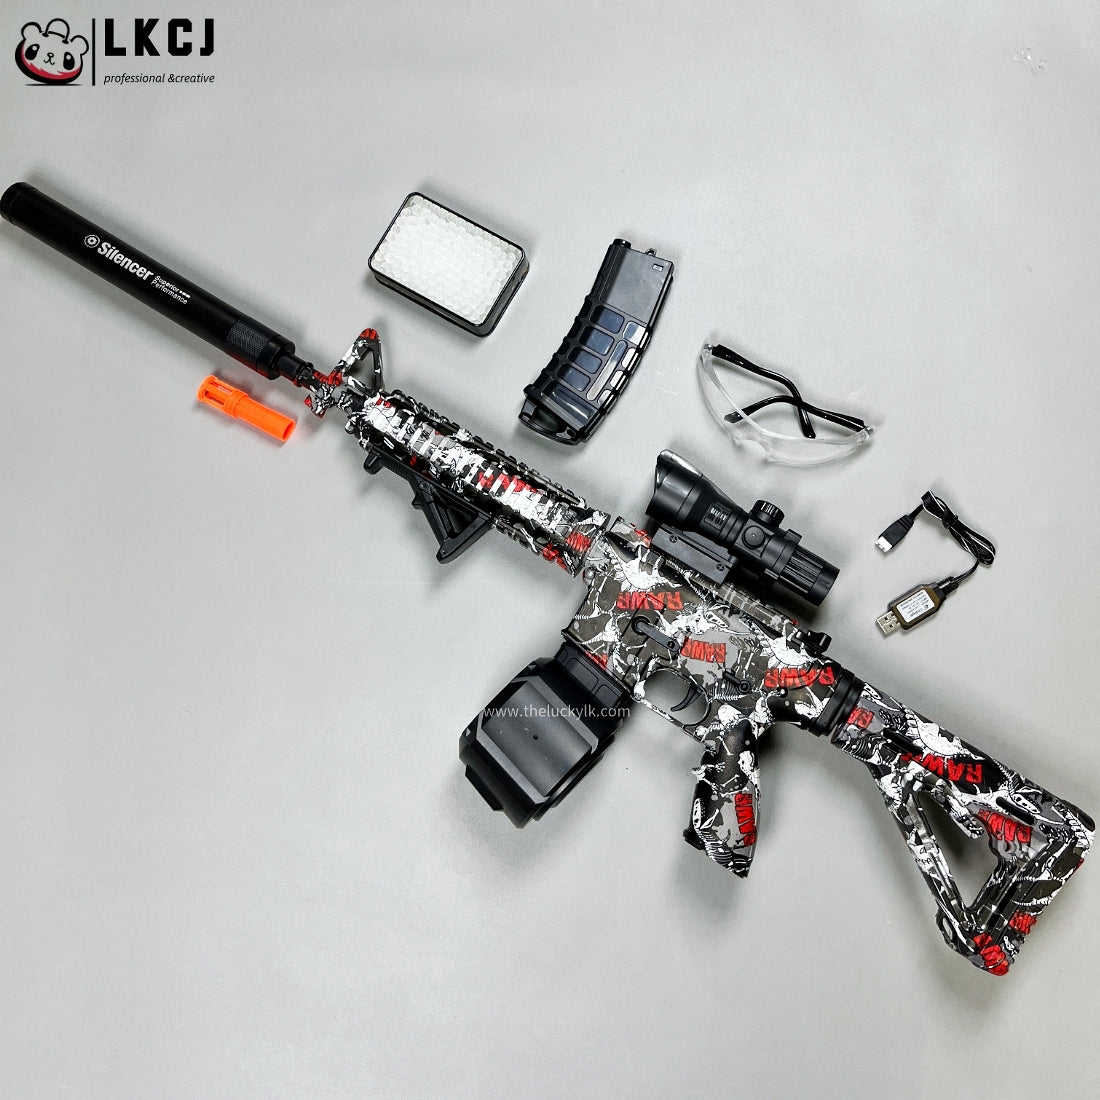 Exquisite Graffiti M416 Gel Blasters 25M Shoot Range With 2 Mags LKCJ